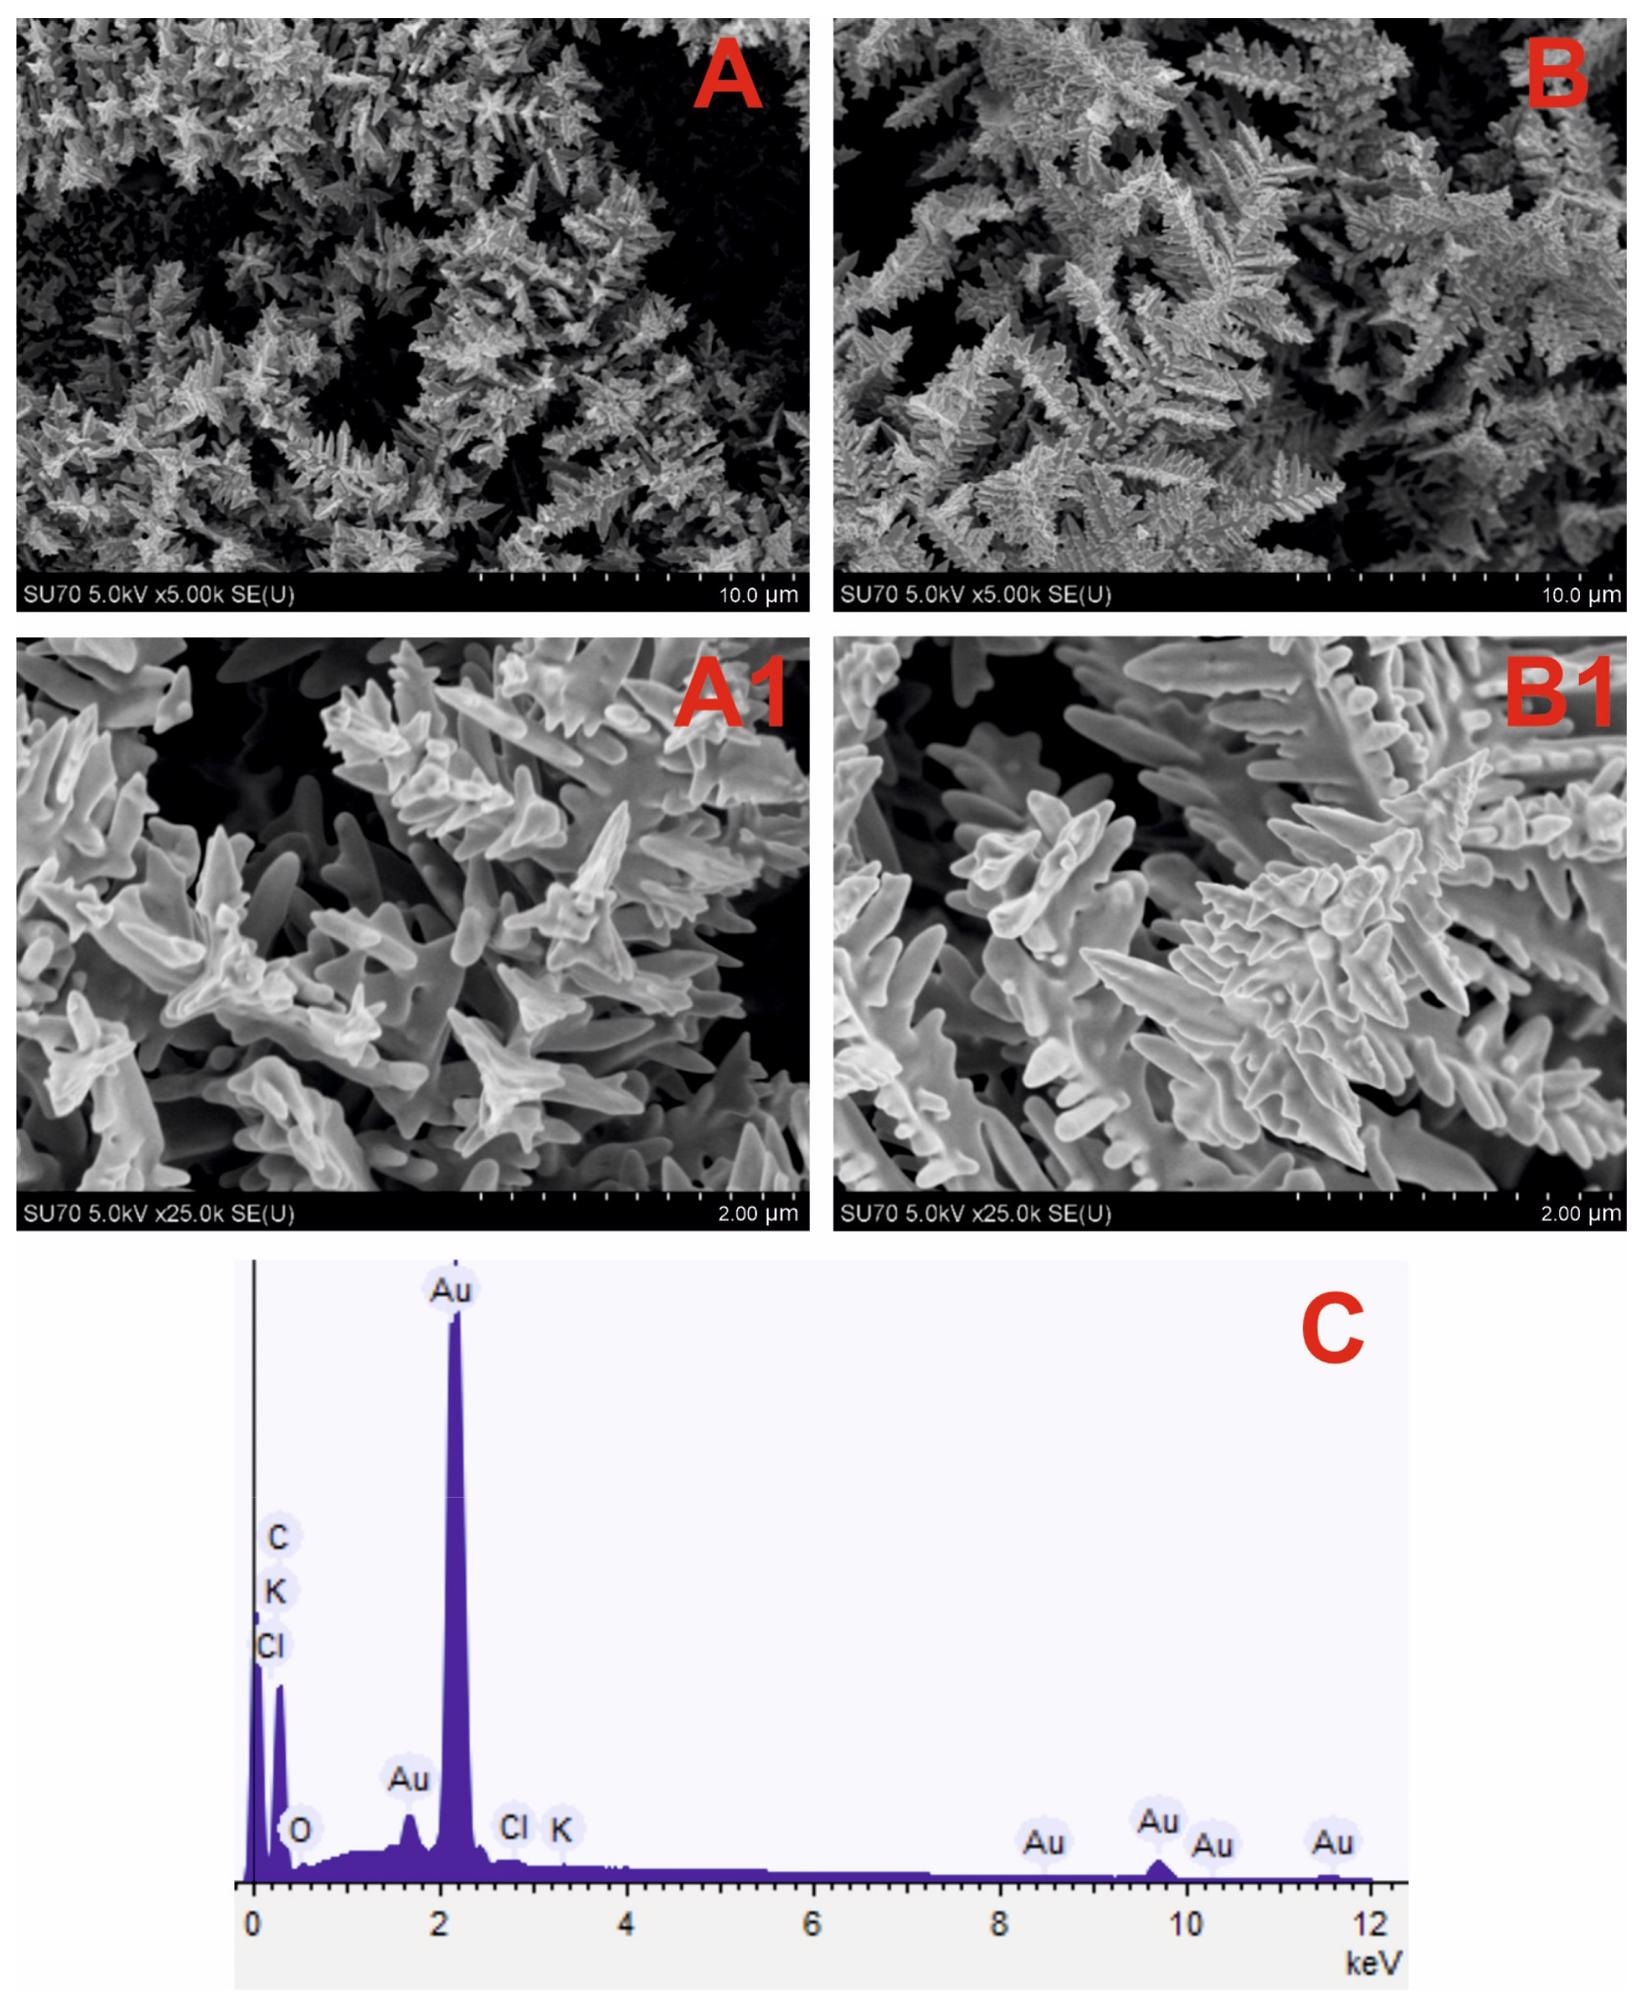 SEM images of the DGNs electrochemically deposited on a GR electrode at a constant -0.2 V potential for 200 seconds (A, A1) and 400 seconds (B, B1) from a 10 mM solution of HAuCl4 containing 0.1 M KNO3 (pictures (A1, B1) are magnified images of (A, B)) and EDS spectrum (C) of dendritic gold nanostructures presented in (A) SEM image.